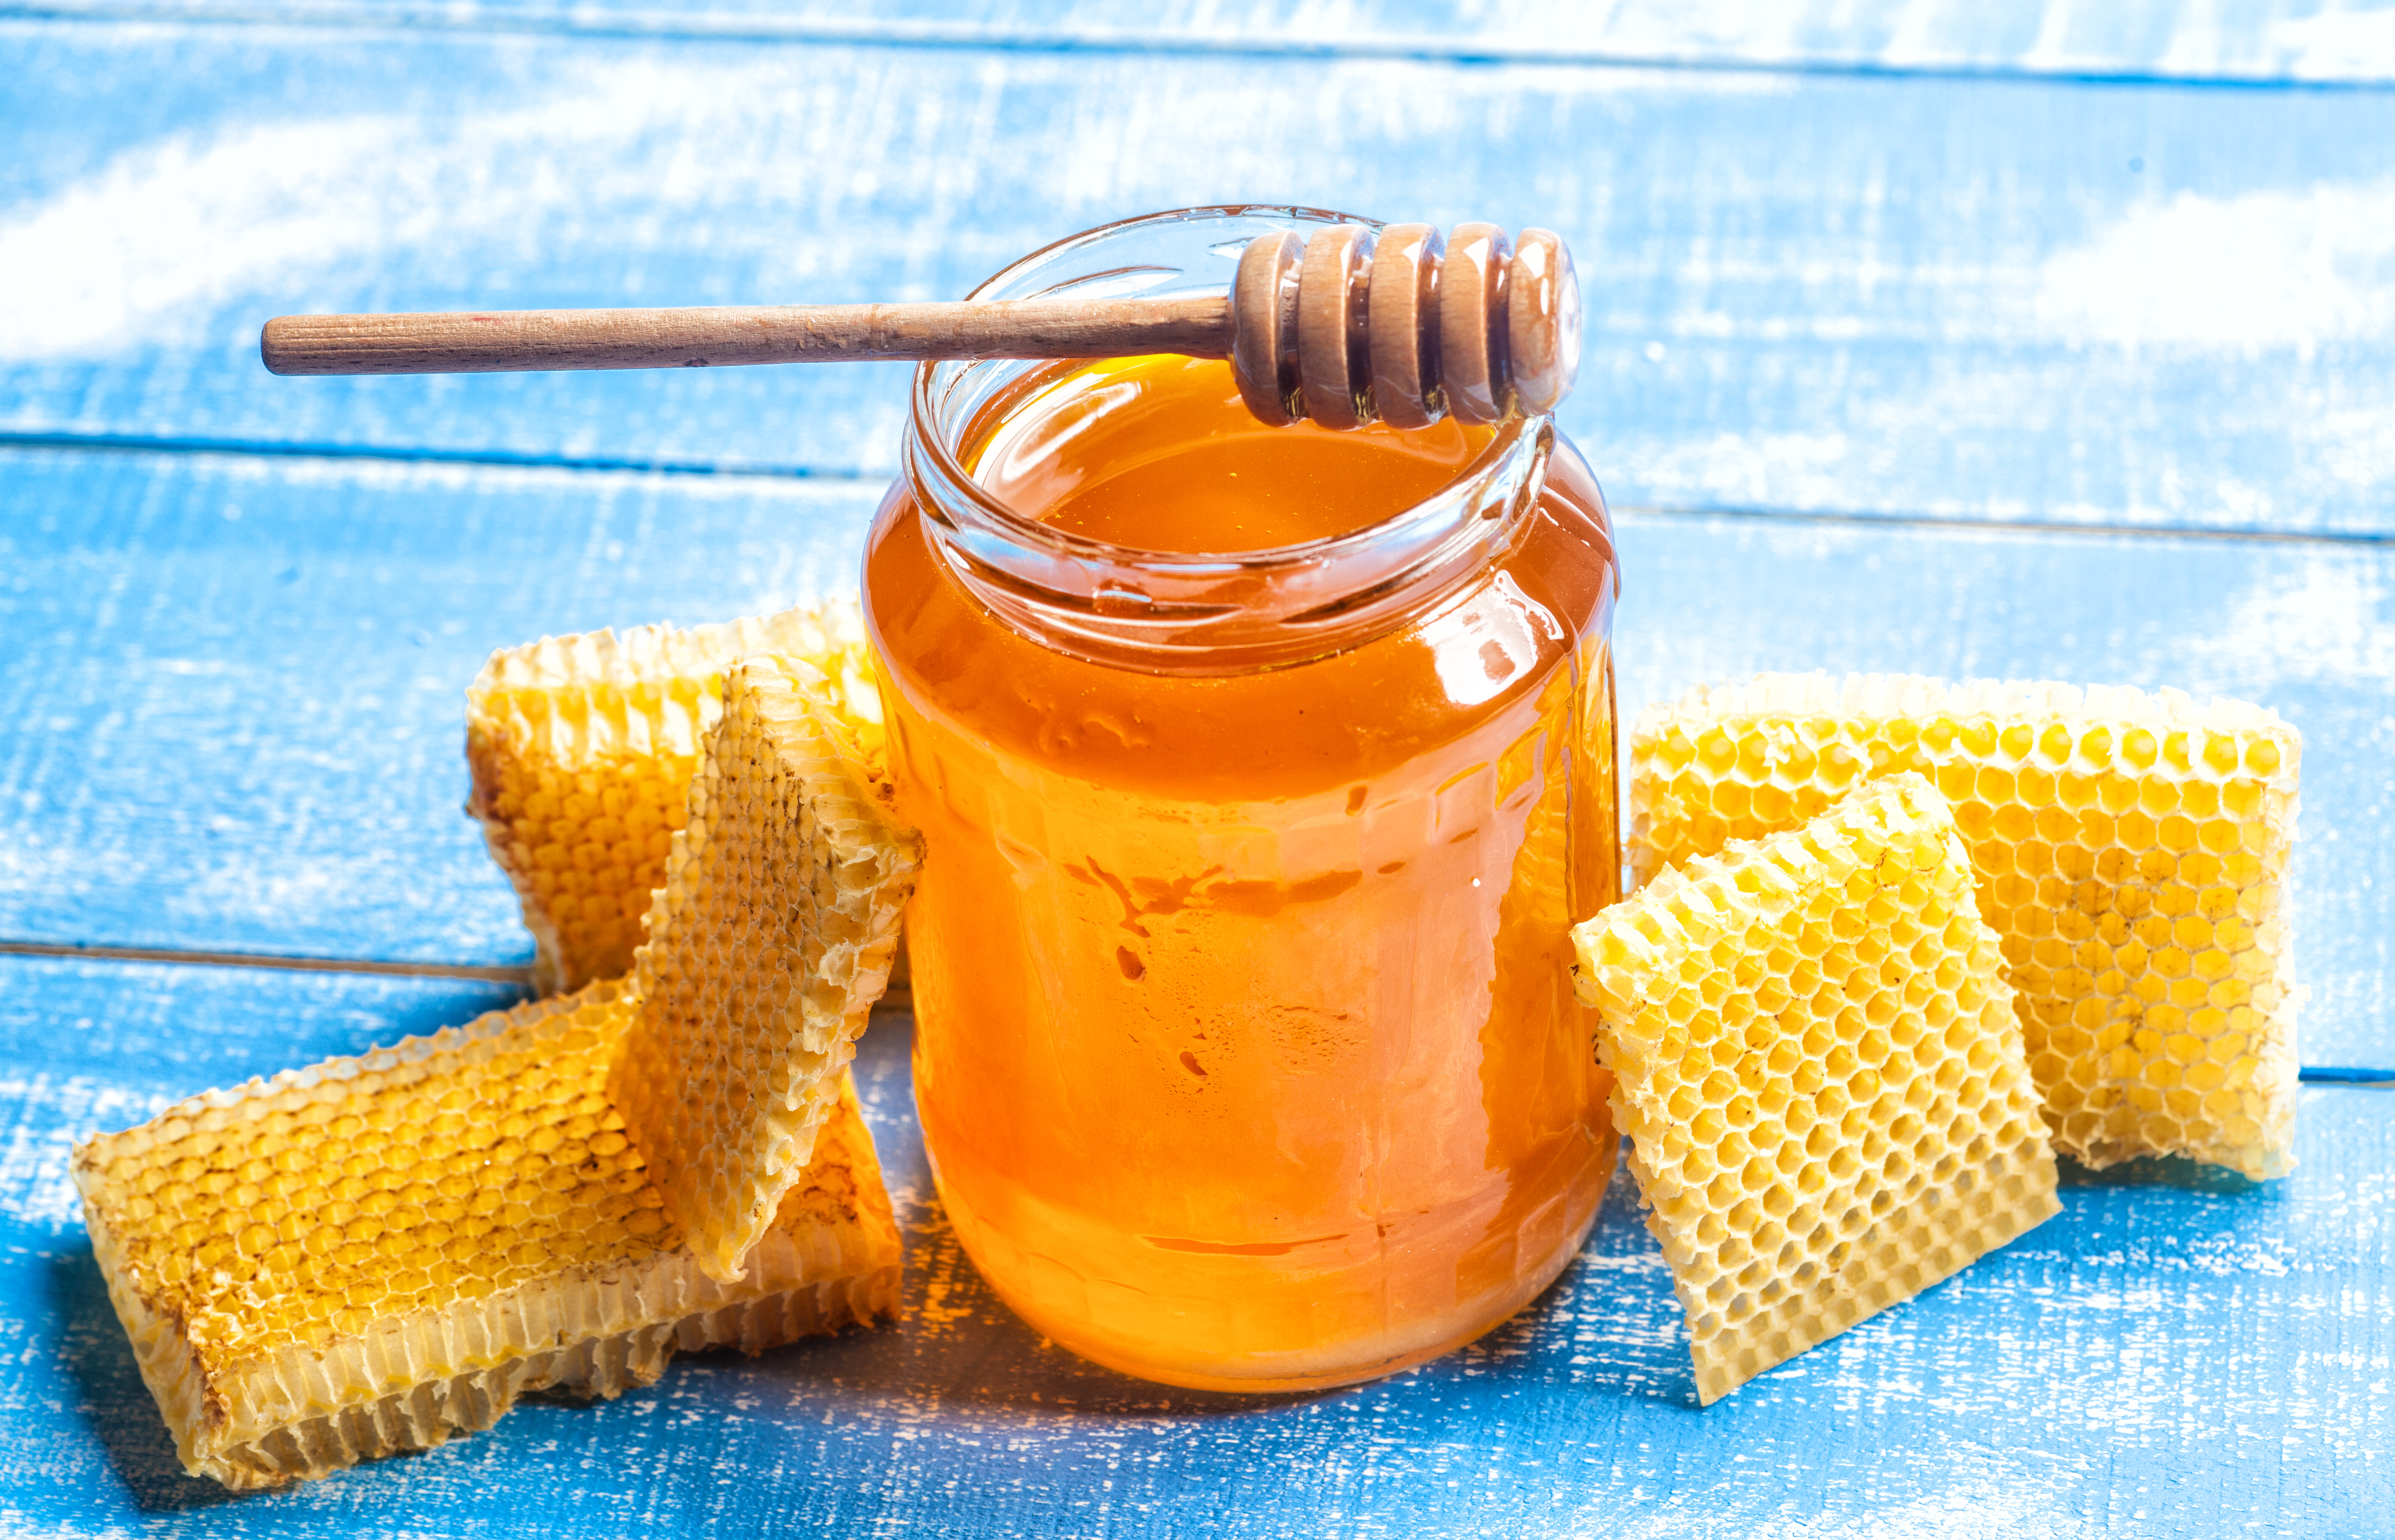 Raw honey: 7 health benefits and possible risks